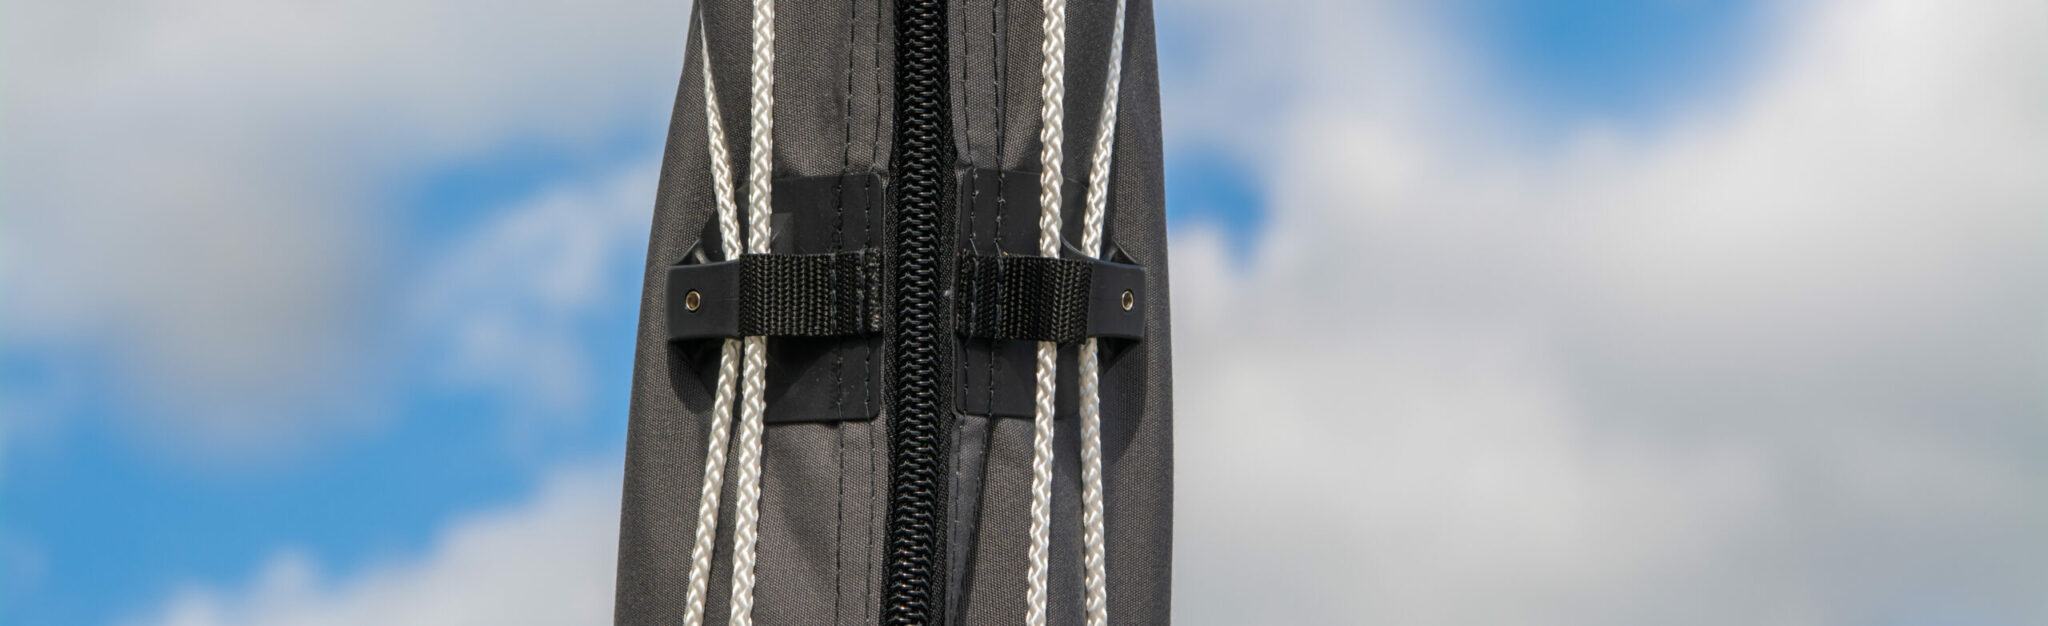 Rolfok cover grey with zippers